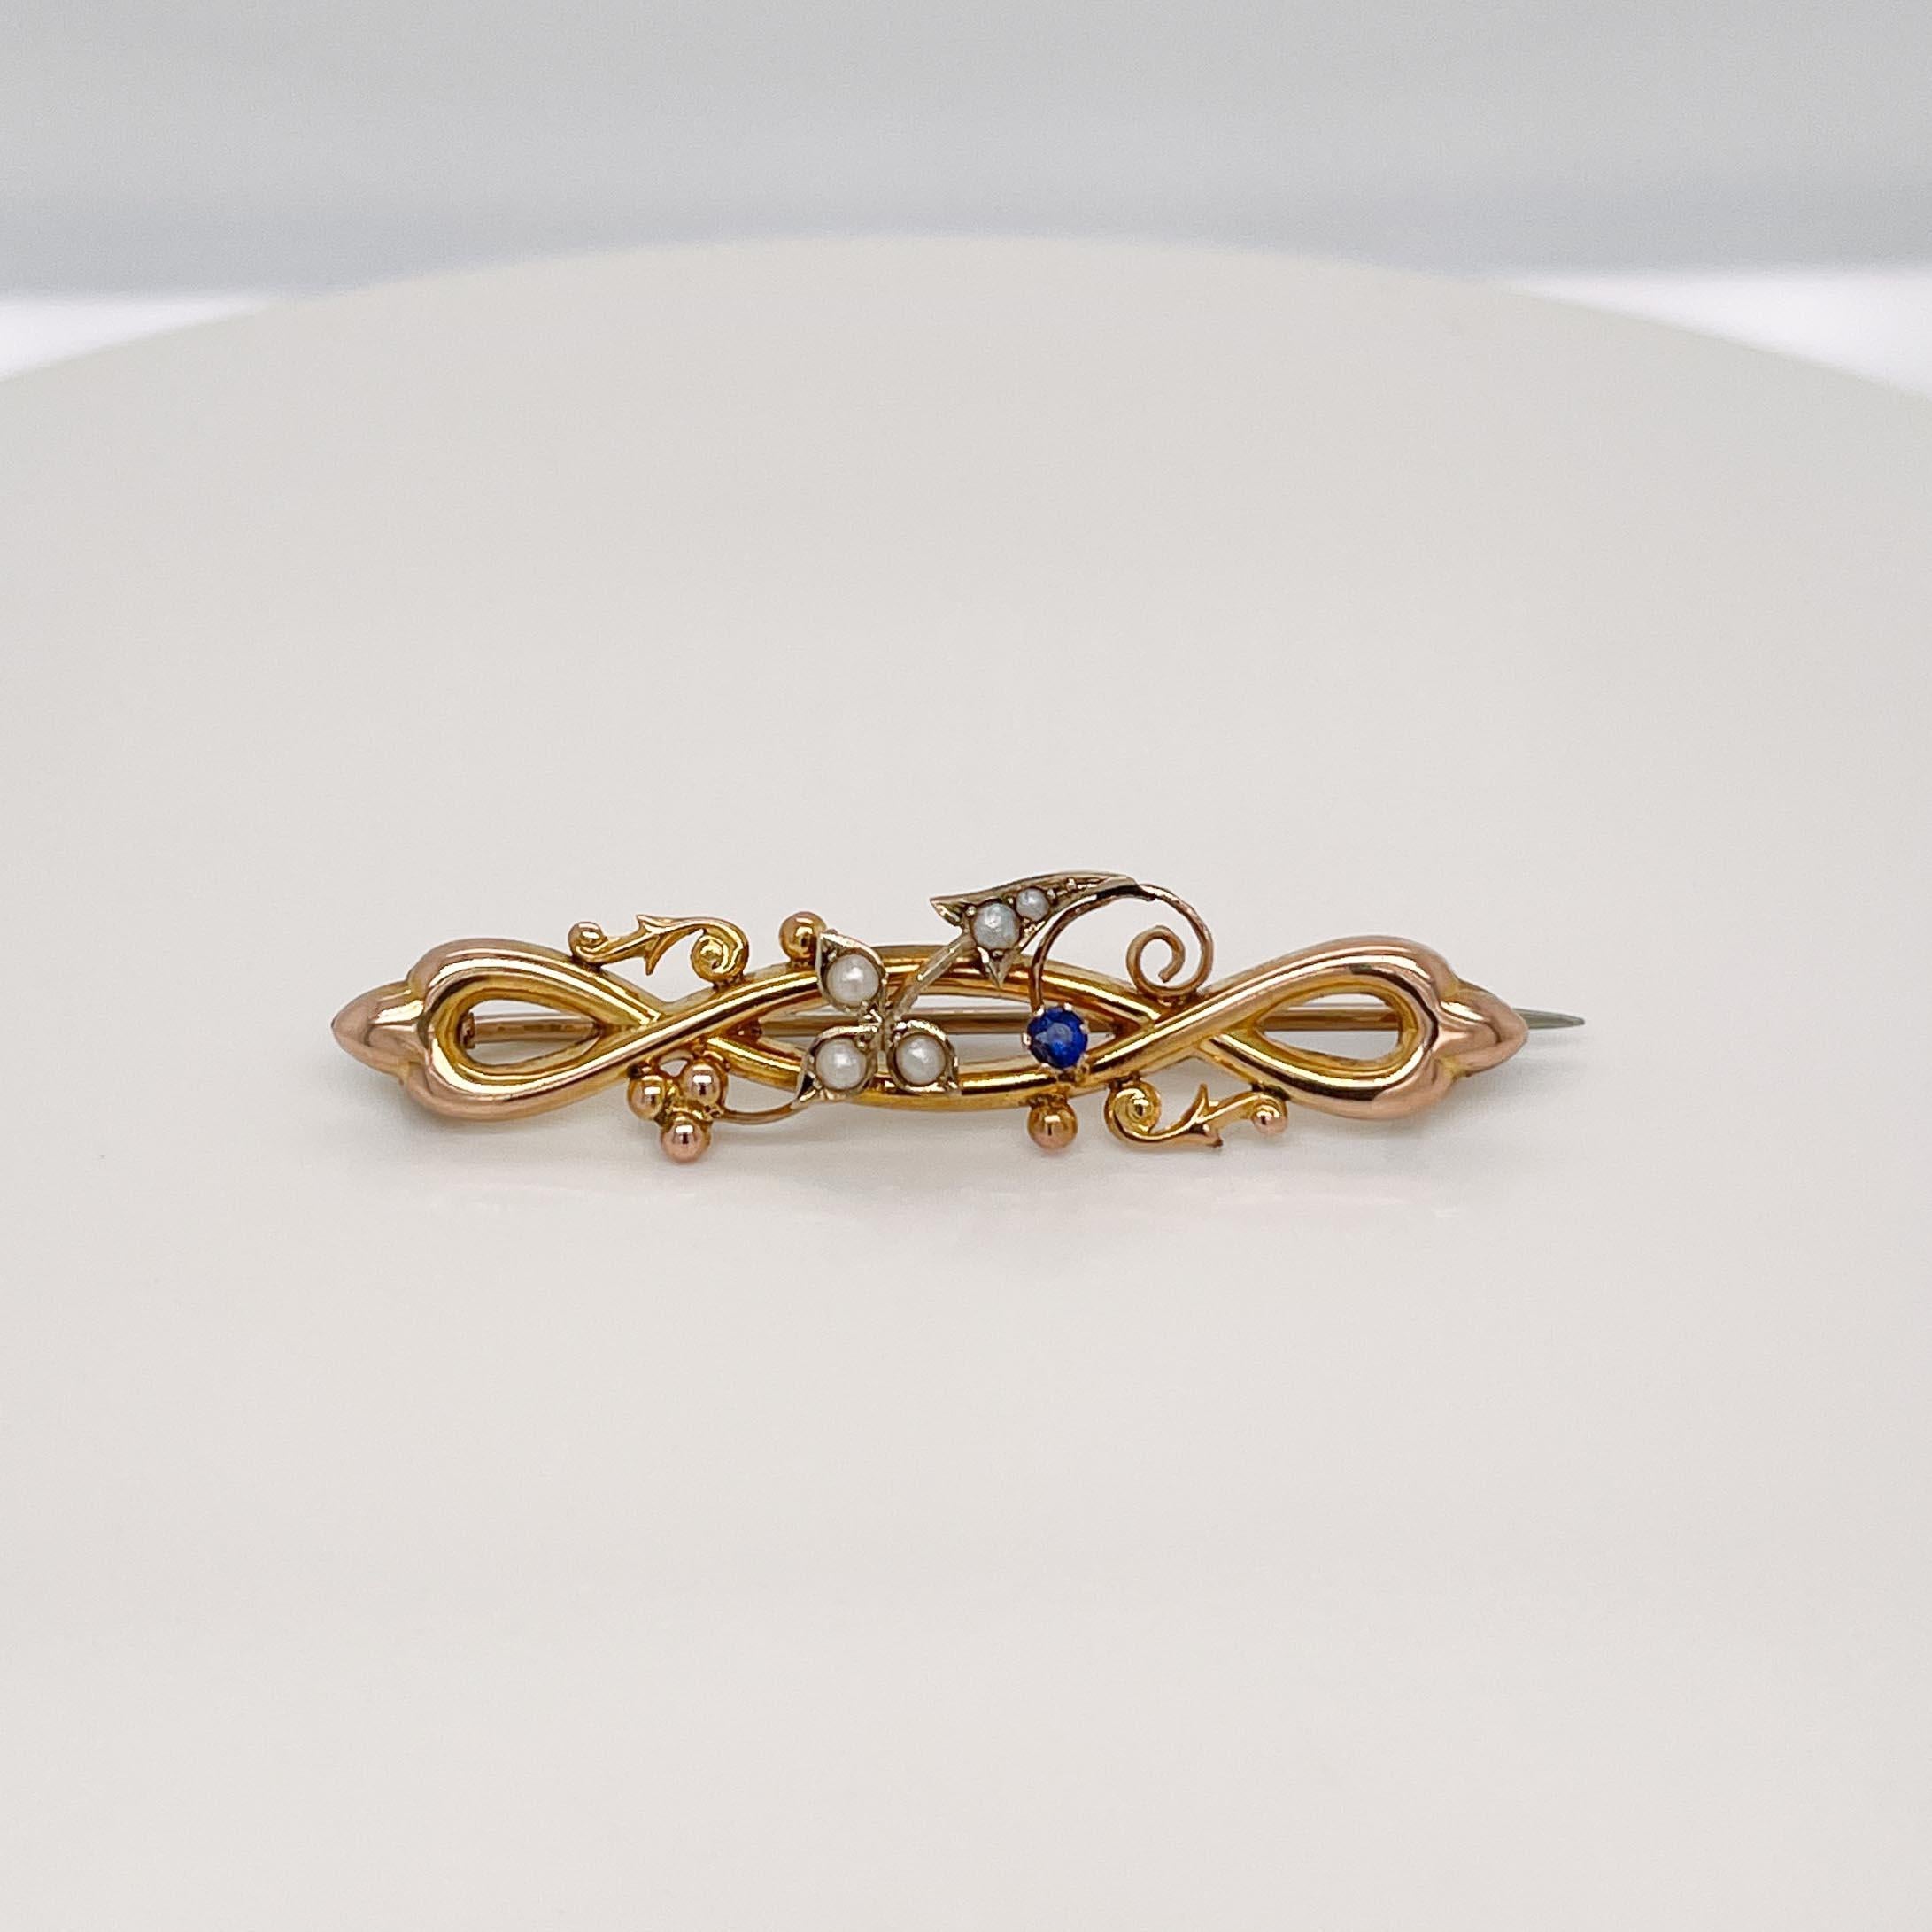 Signed Antique English Art Nouveau 9 Ct Gold and Seed Pearl Brooch